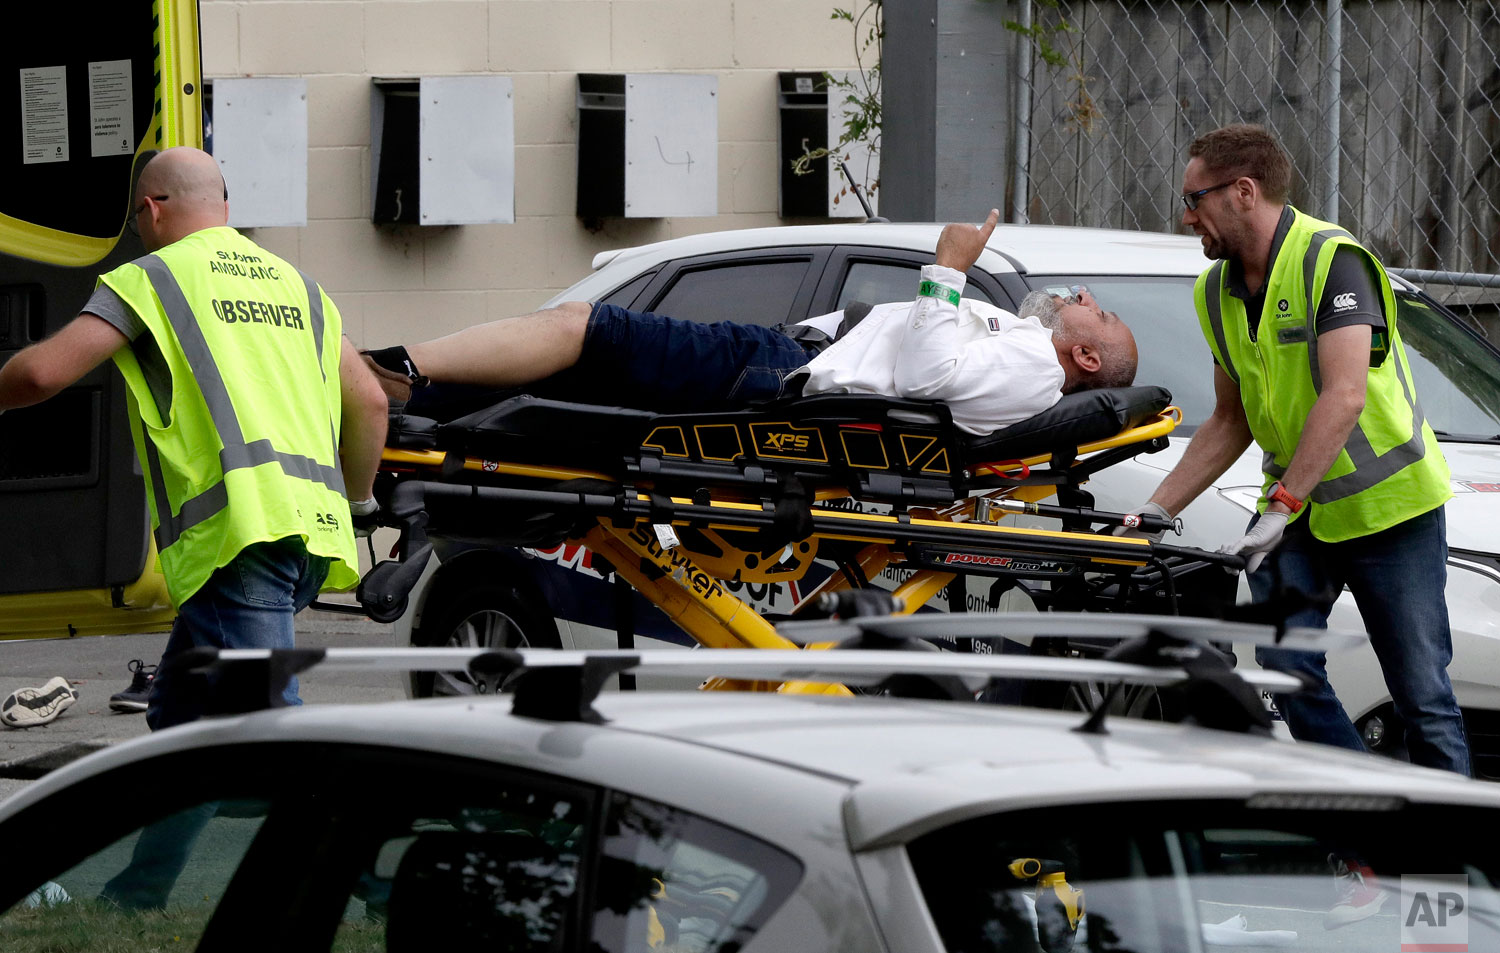  Ambulance staff take a man from outside a mosque in central Christchurch, New Zealand, Friday, March 15, 2019. (AP Photo/Mark Baker) 